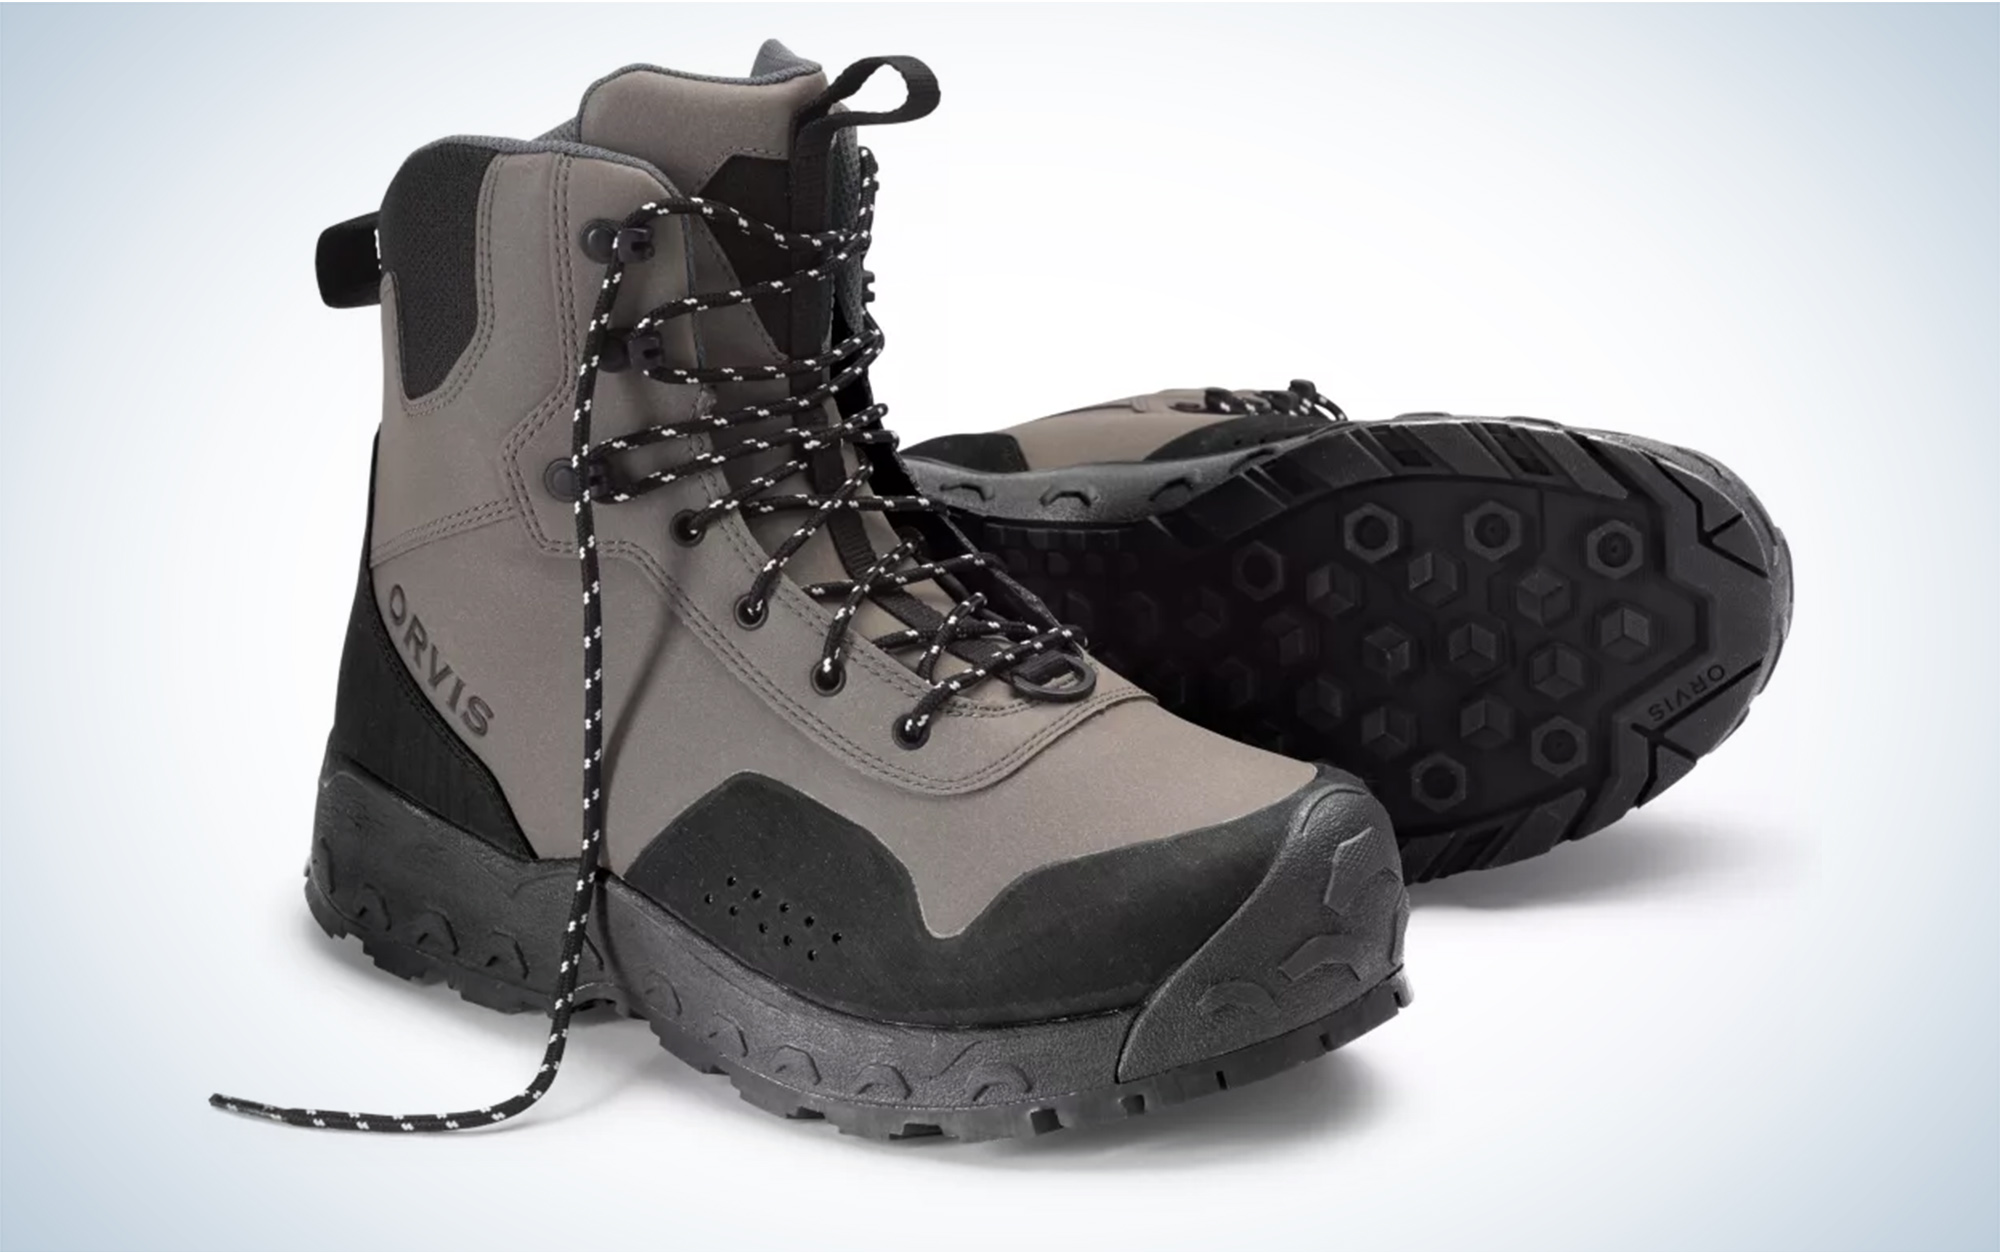 Andrew Creek Dark Wading Boot with Rubber Sole